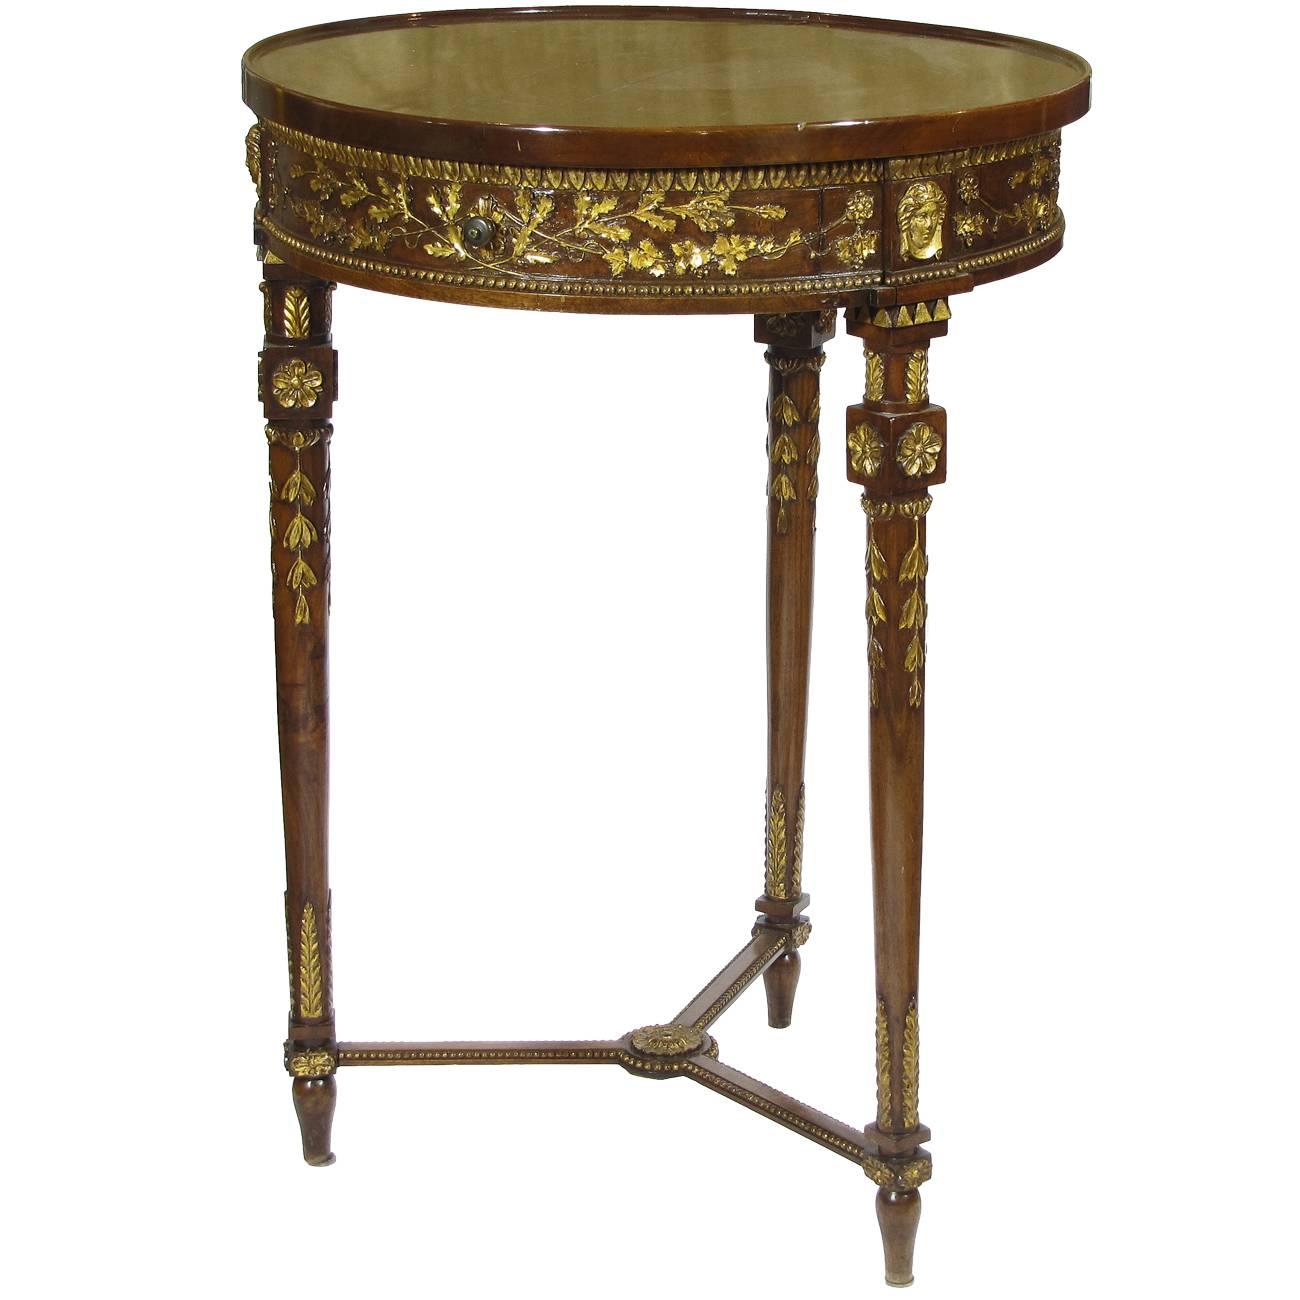 Mid-19th Century Solid Walnut Louis XVI Carved and Leaf Gilded Table